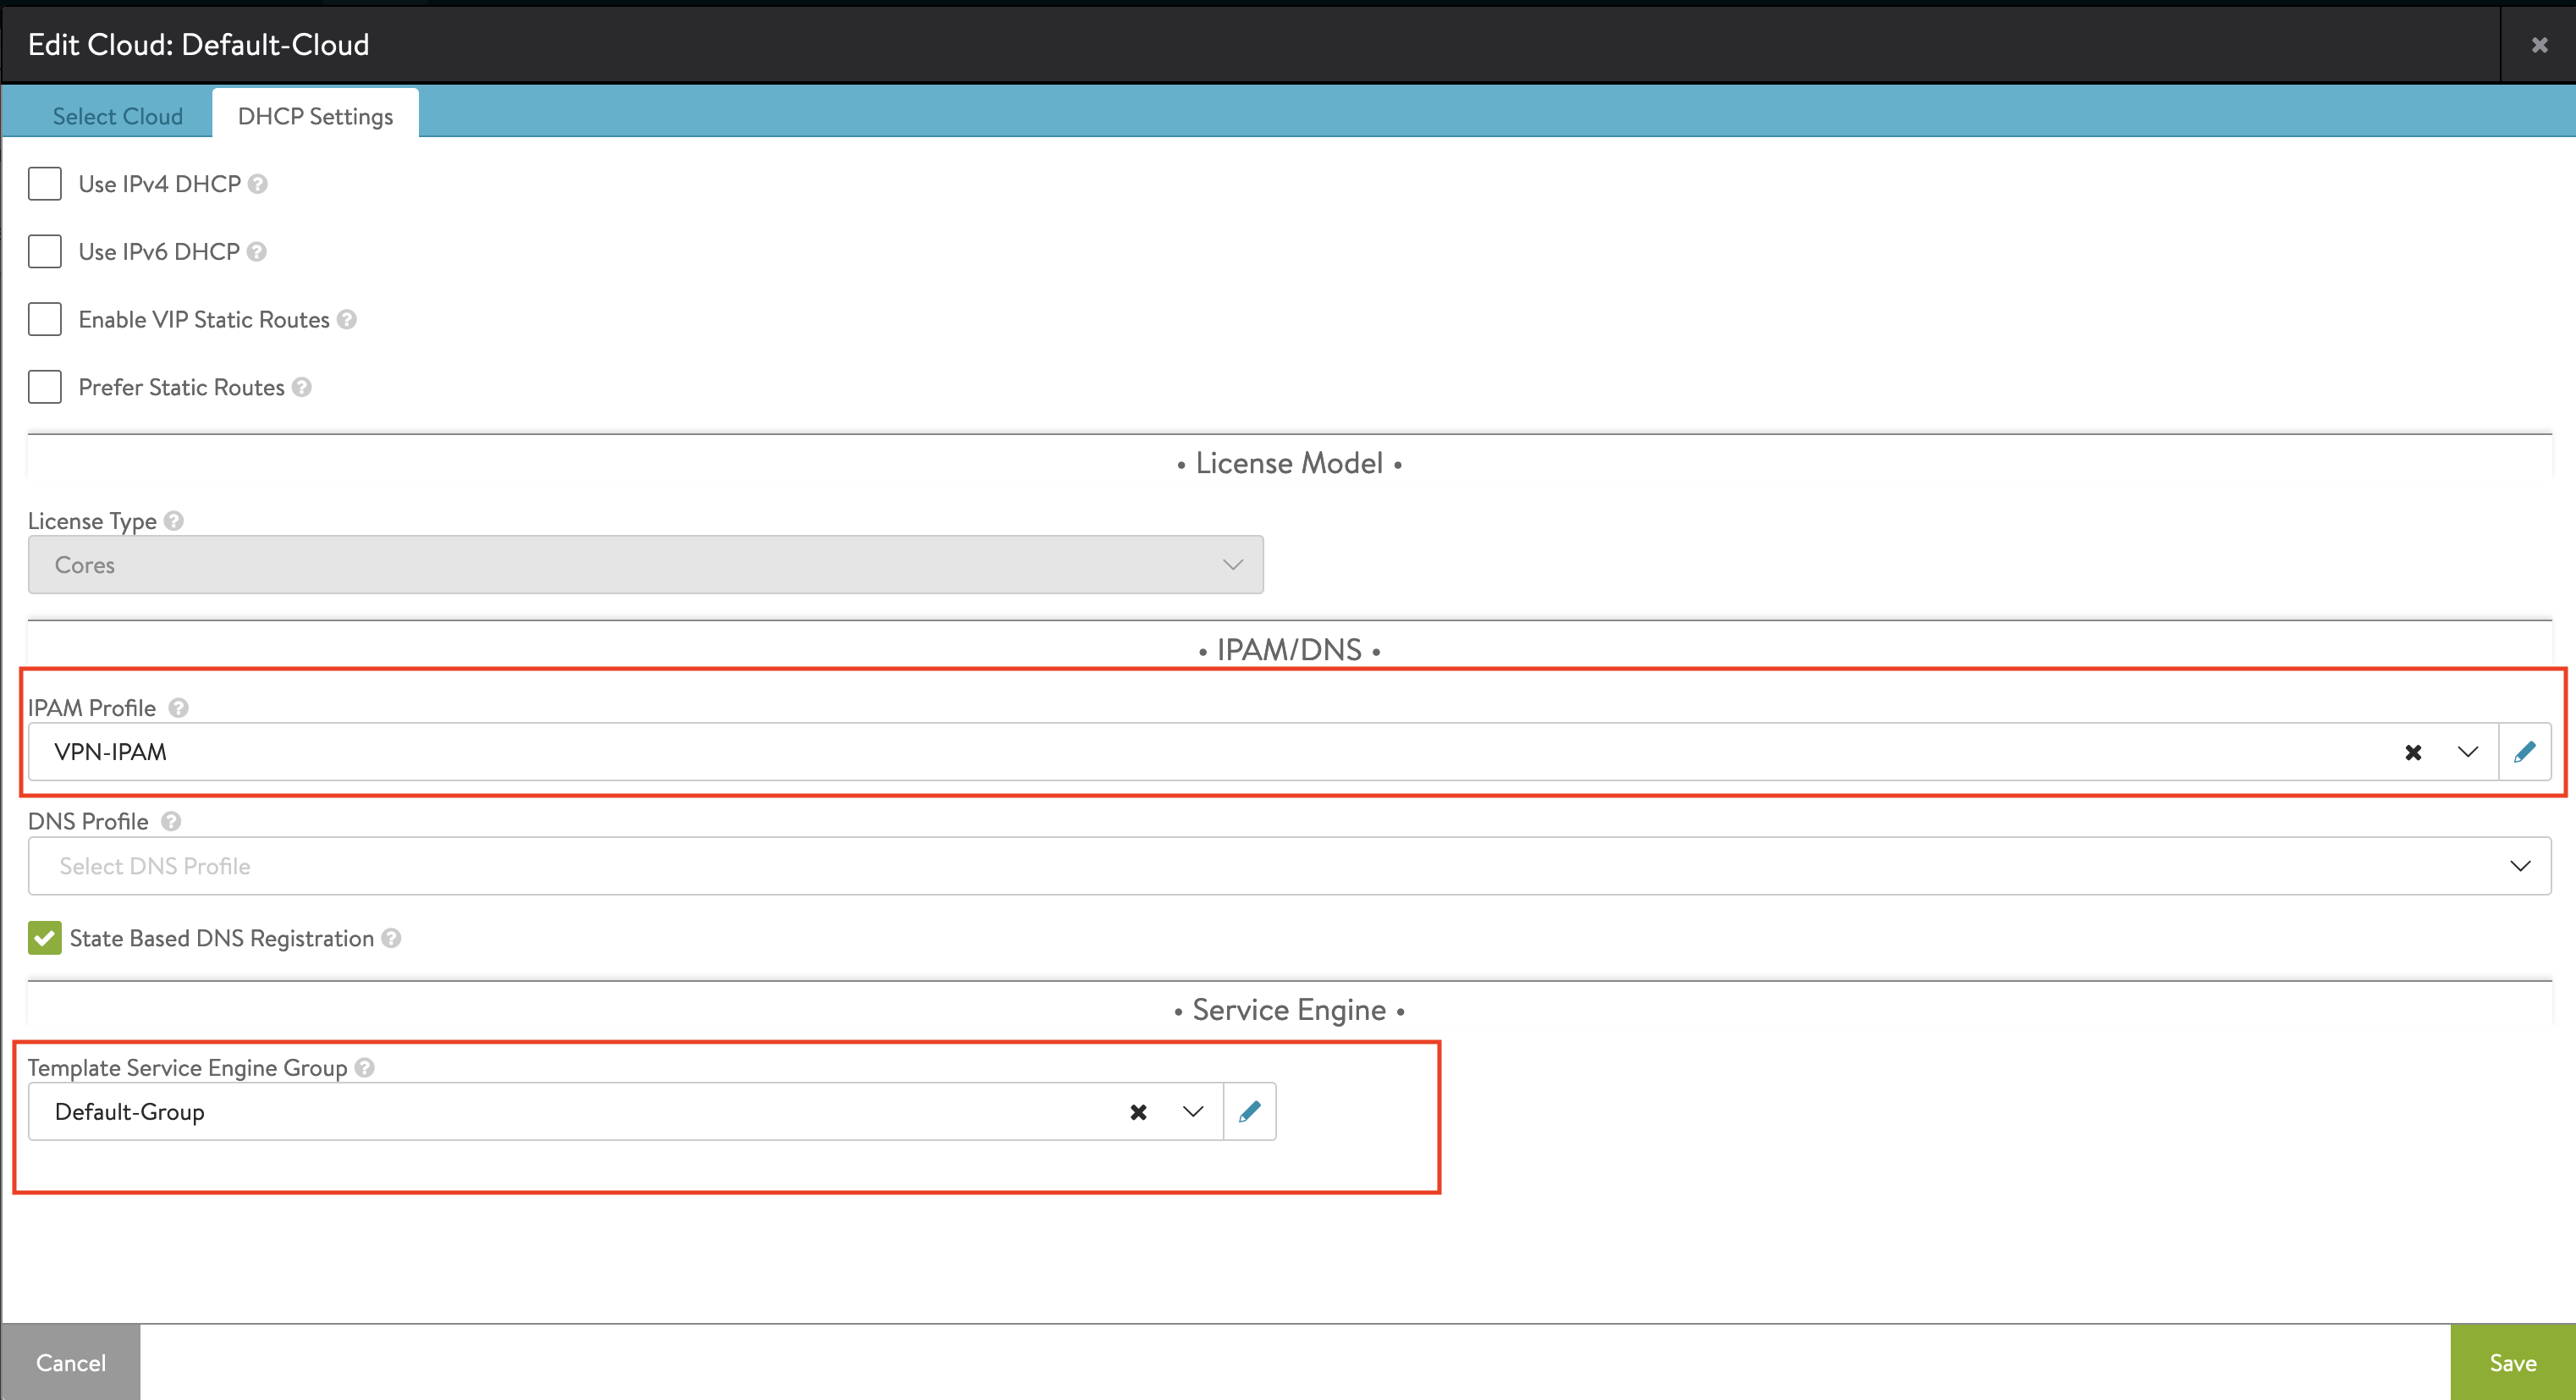 Add the IPAM and DNS Profiles to the Cloud